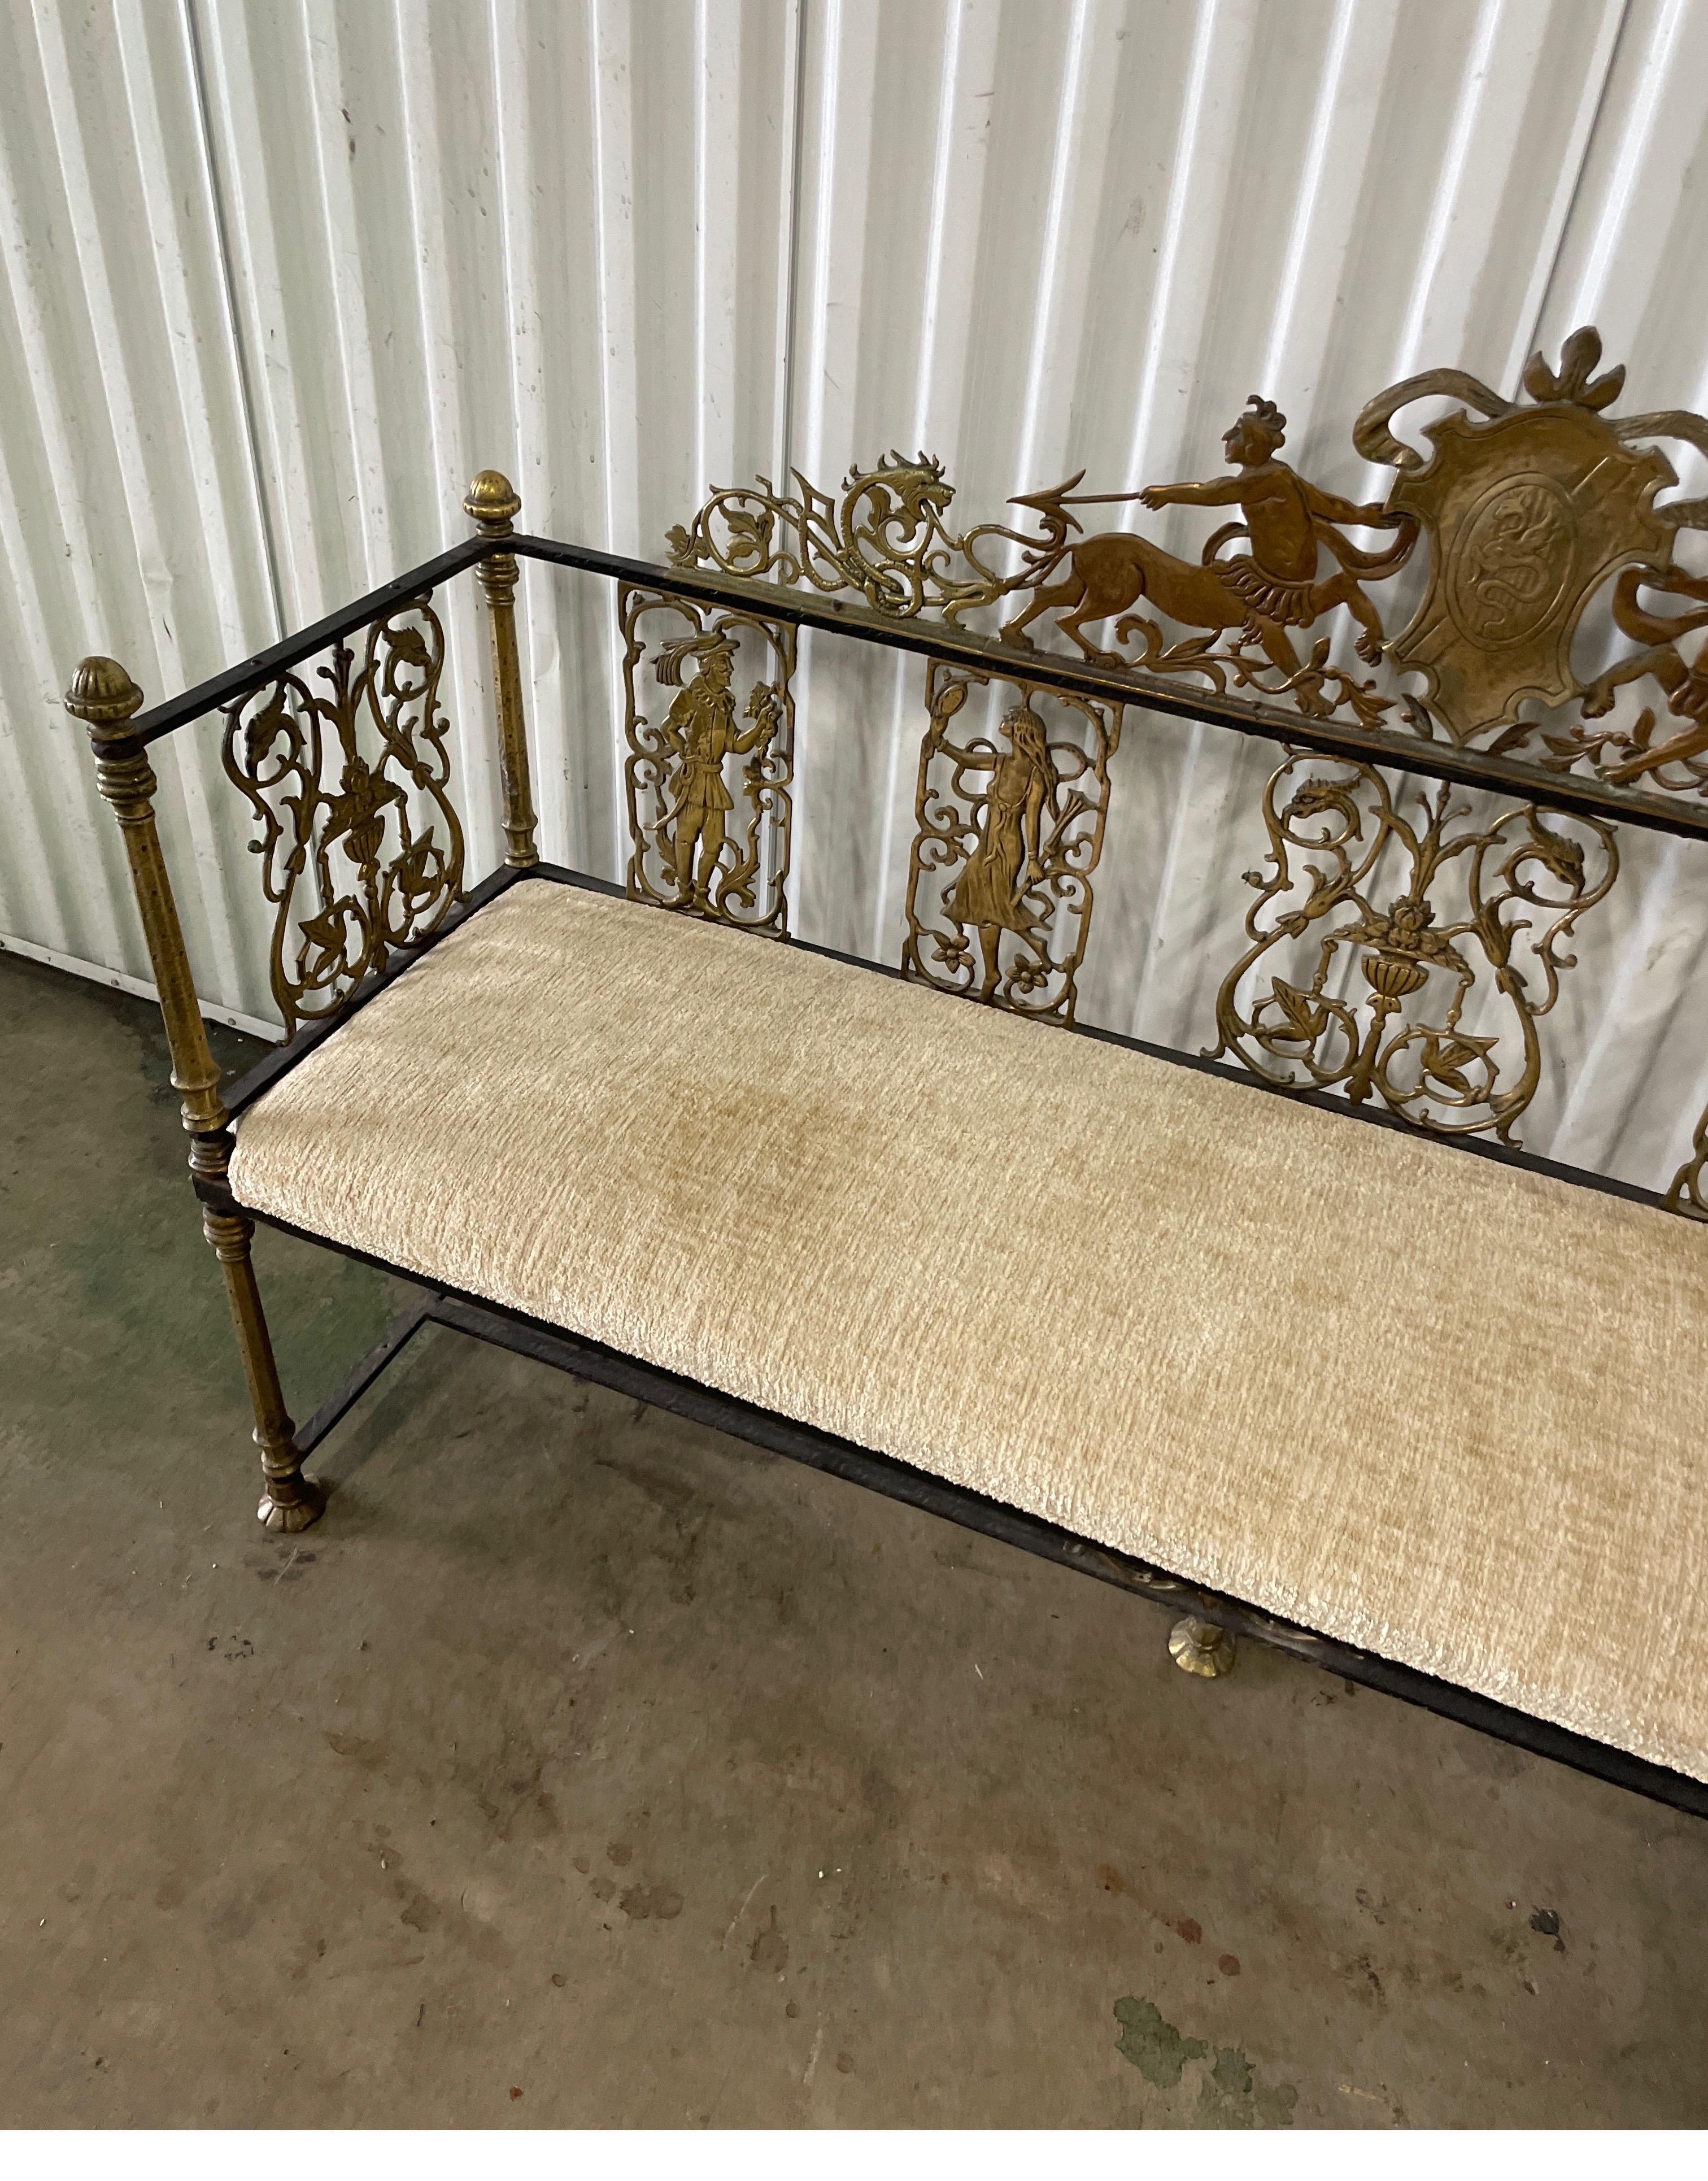 Neoclassical Brass & Wrought Iron Antique Bench In Good Condition For Sale In West Palm Beach, FL